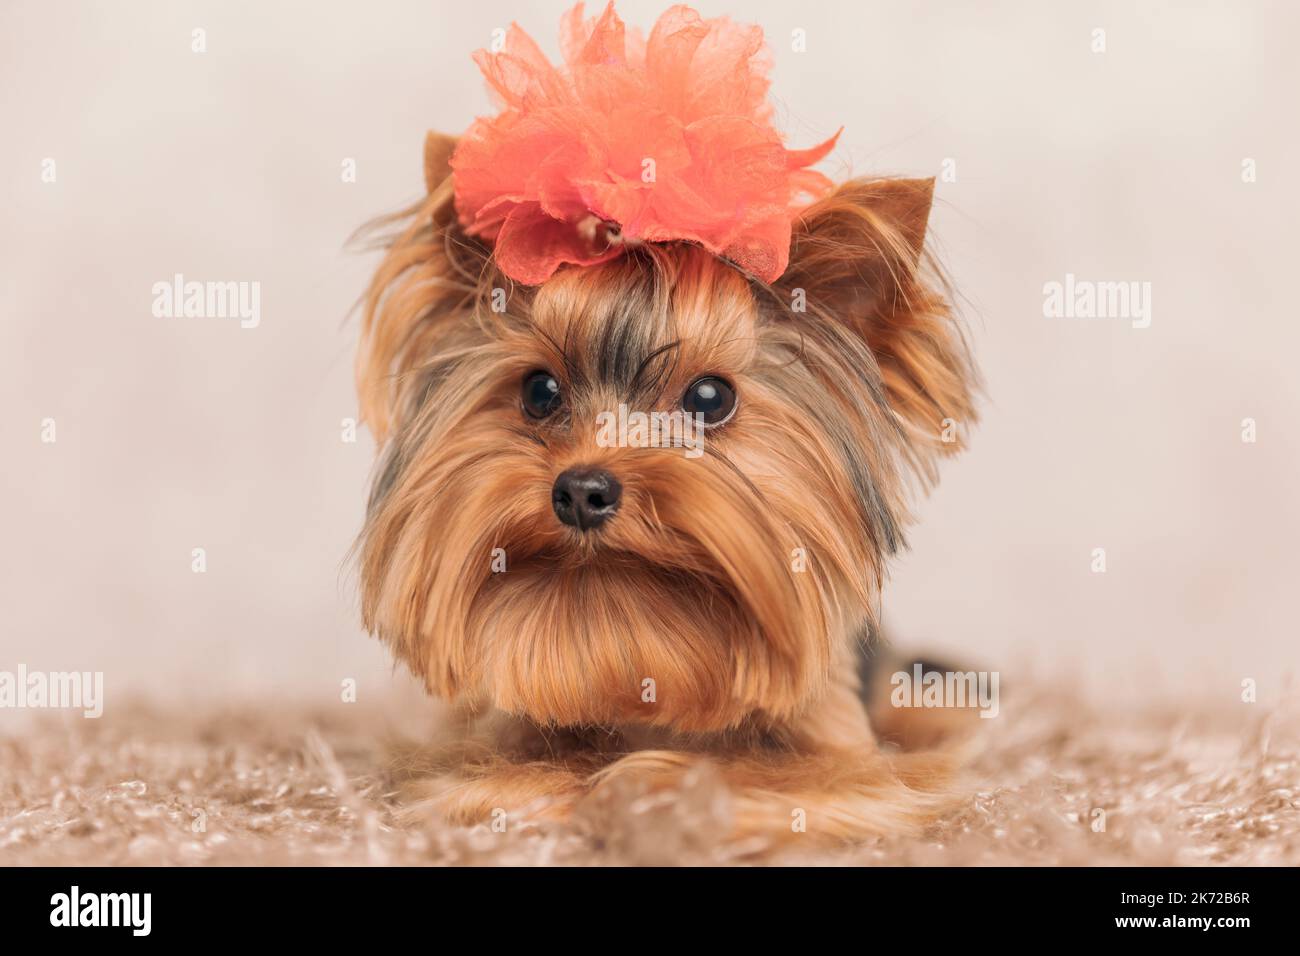 precious little yorkie dog with big red flower hat on head looking away while laying down on carpet in front of beige background Stock Photo